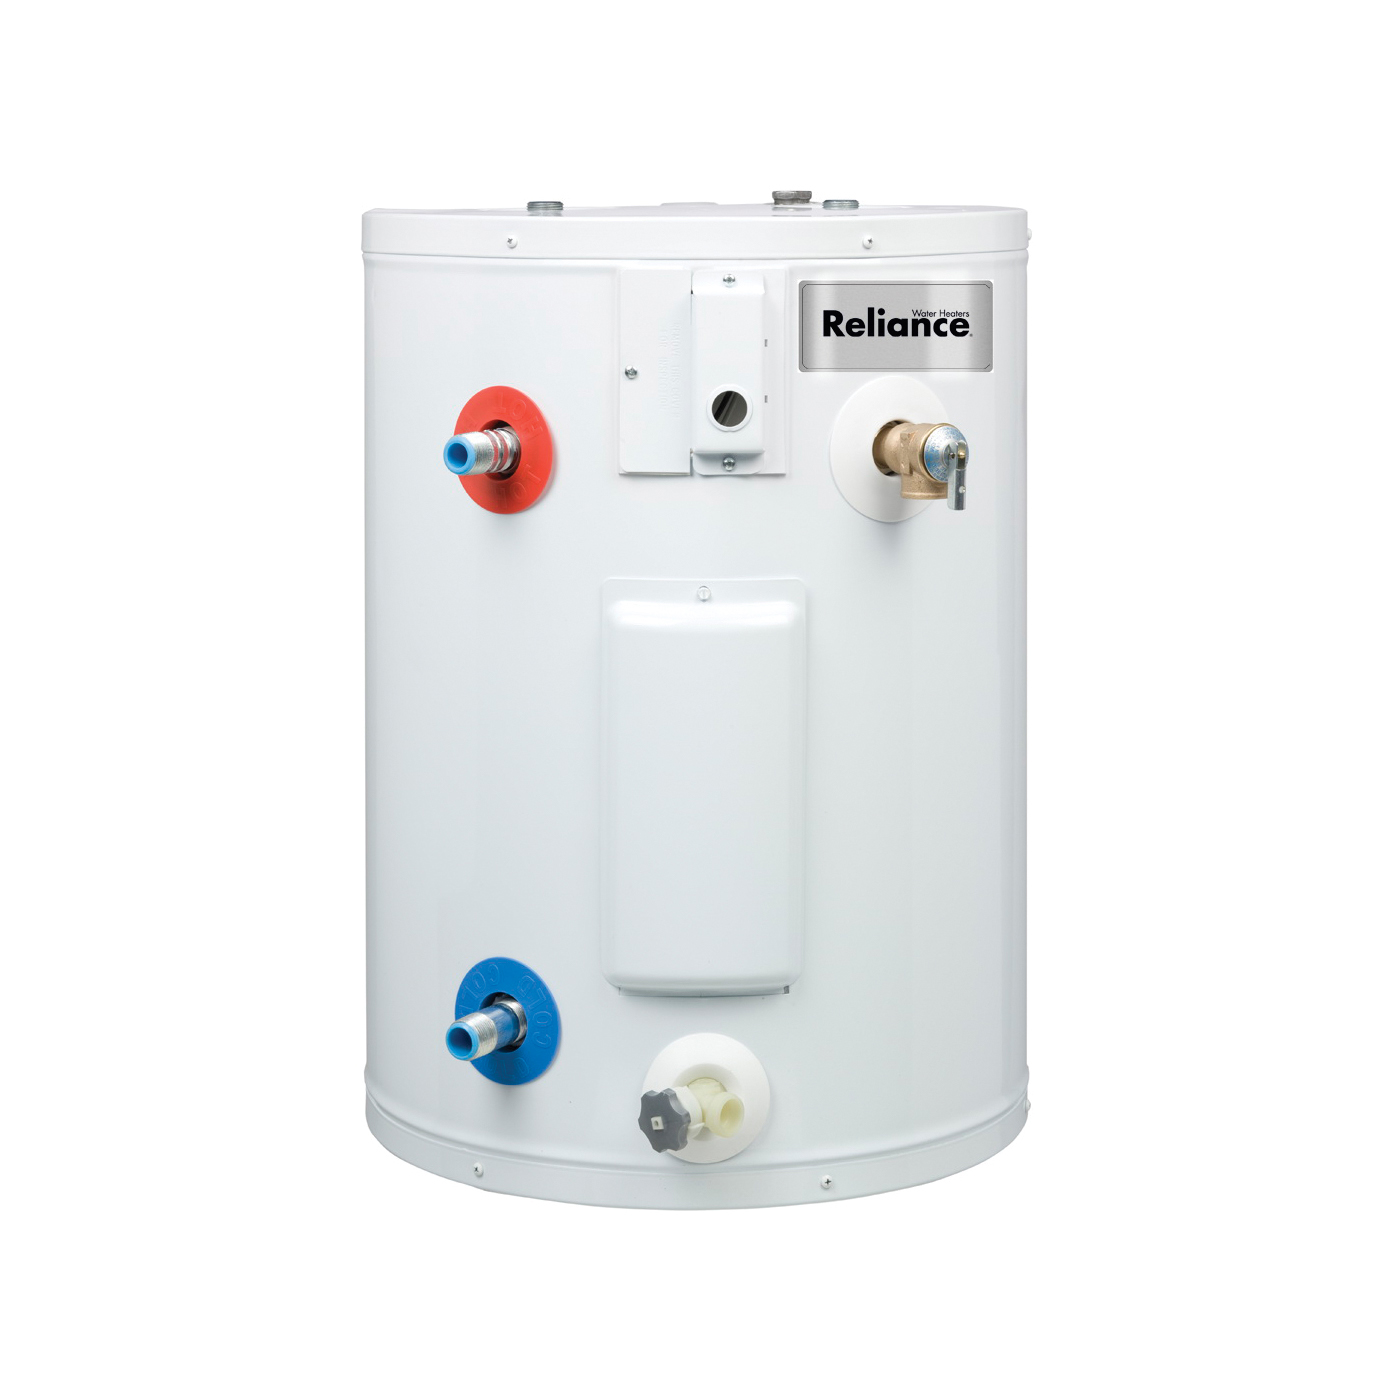 6 20 SOMS K Electric Water Heater, 120 V, 1650 W, 19 gal Tank, Copper Heating Element, Wall Mounting